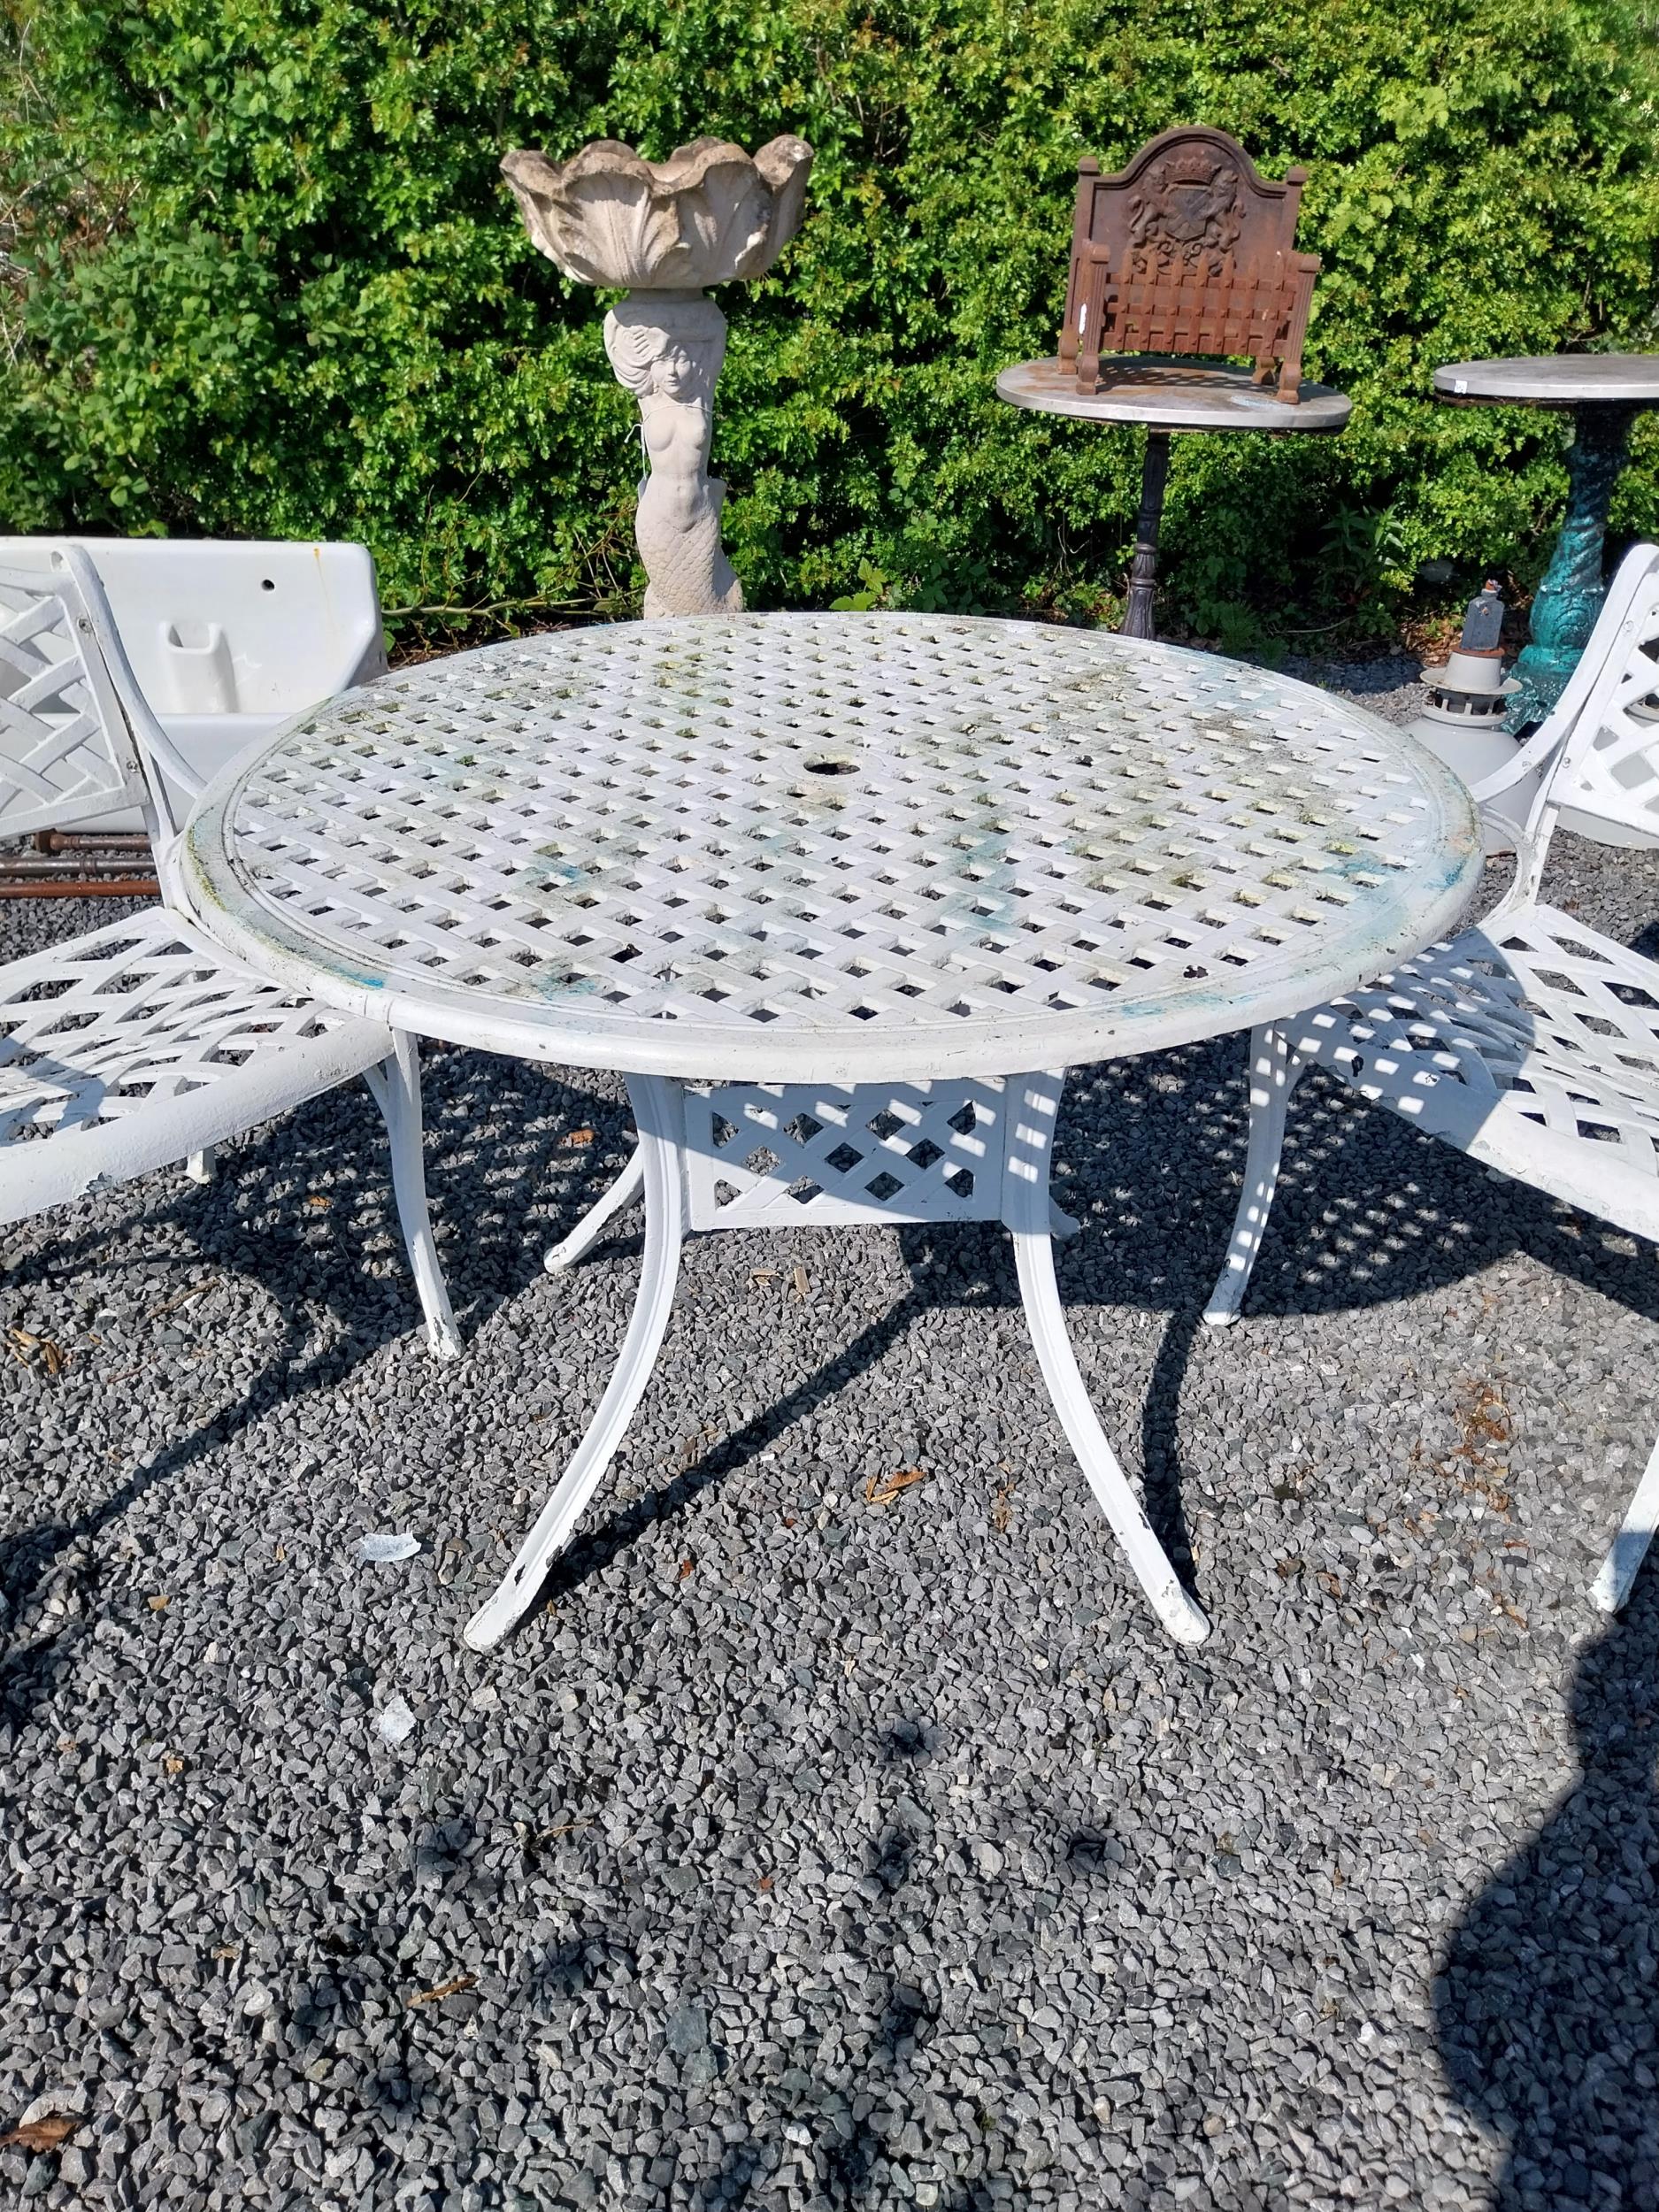 Cast aluminium garden table with two matching armchairs {Tbl. 76 cm H x 160 cm Dia. and Chairs 81 cm - Image 3 of 5